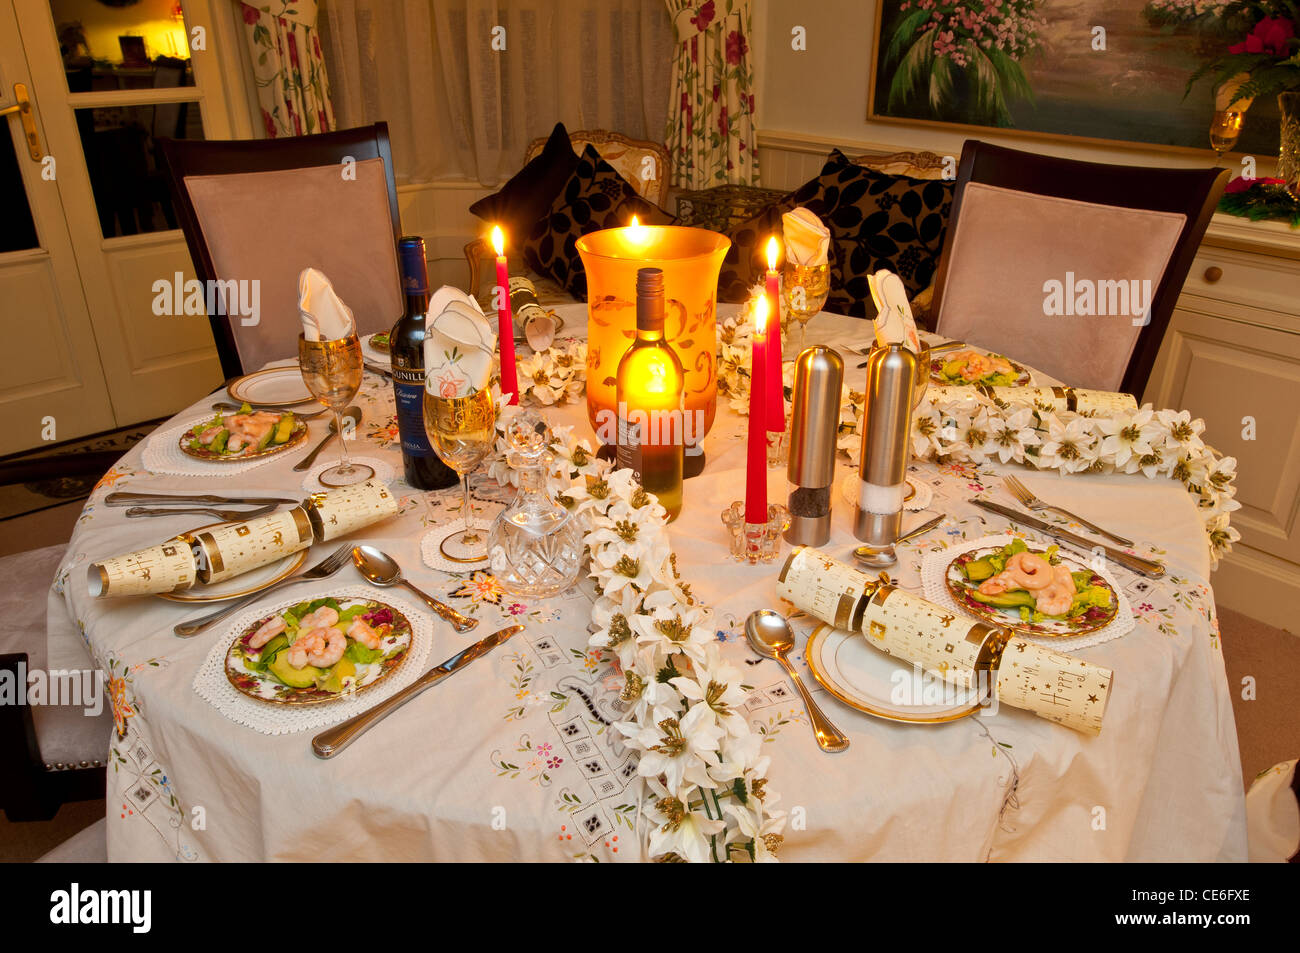 christmas dinner table setting at night Stock Photo